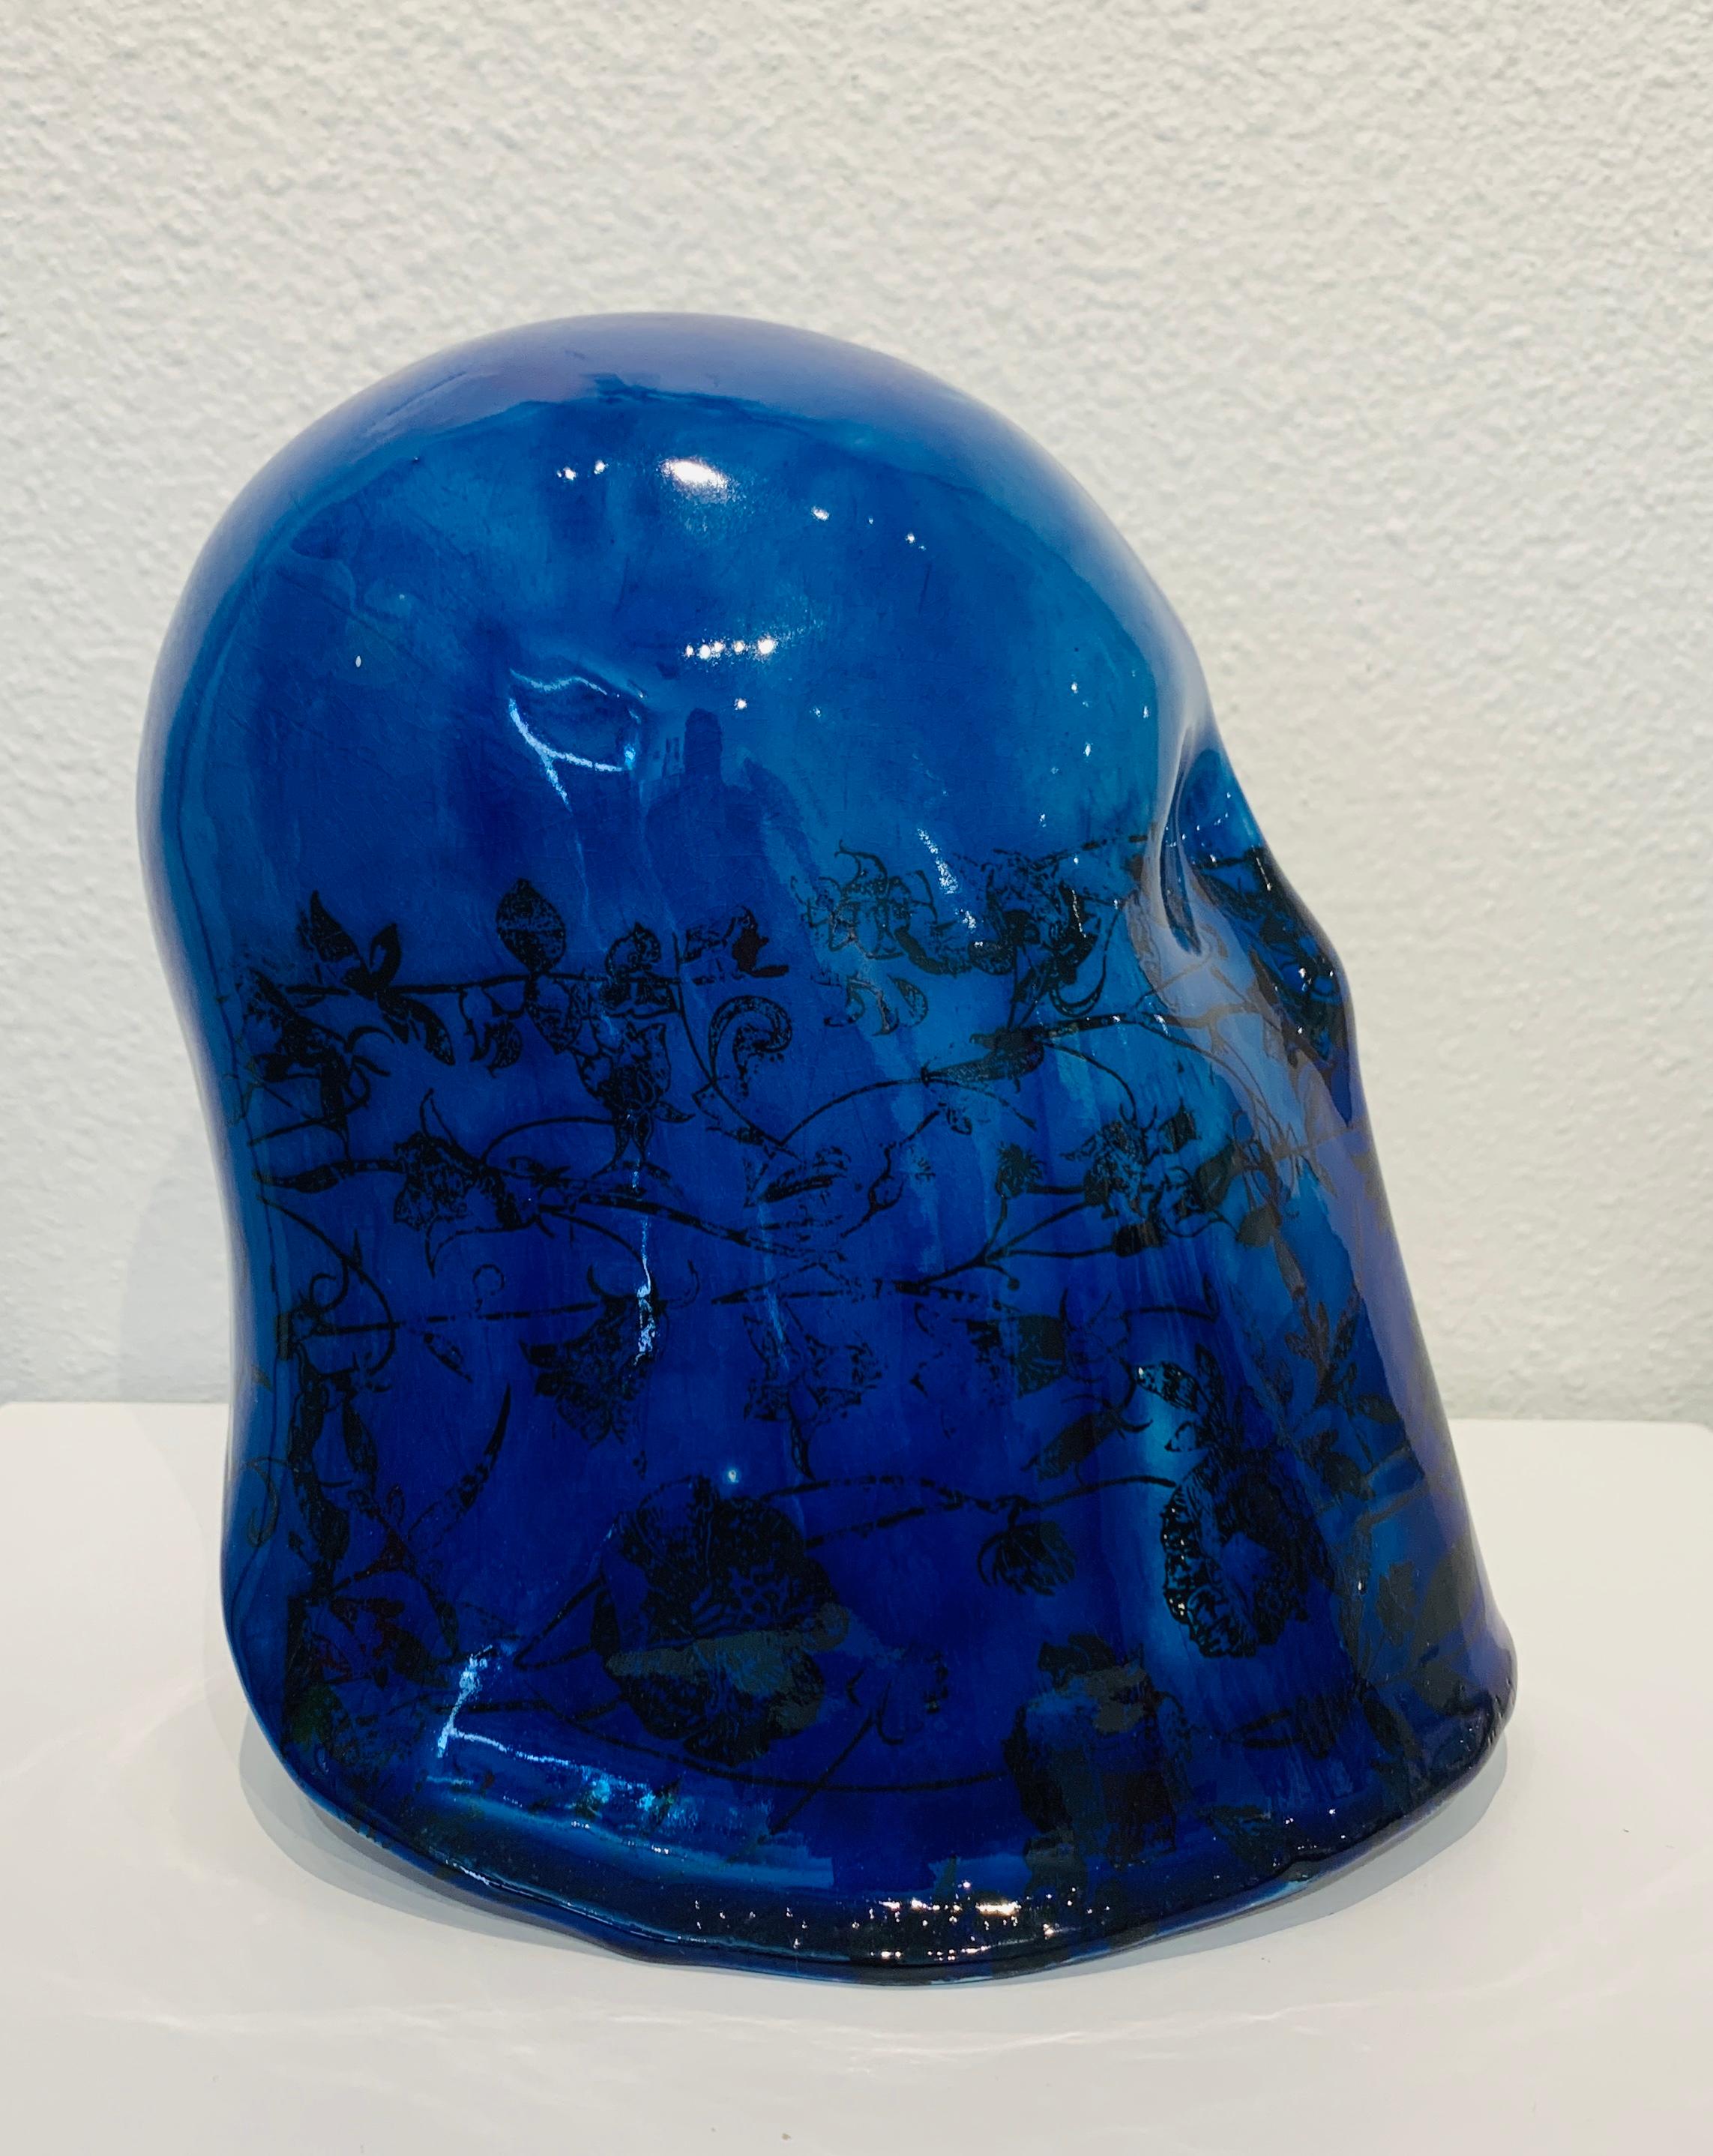 Cobalt Veil - Blue Abstract Sculpture by Chloe Rizzo